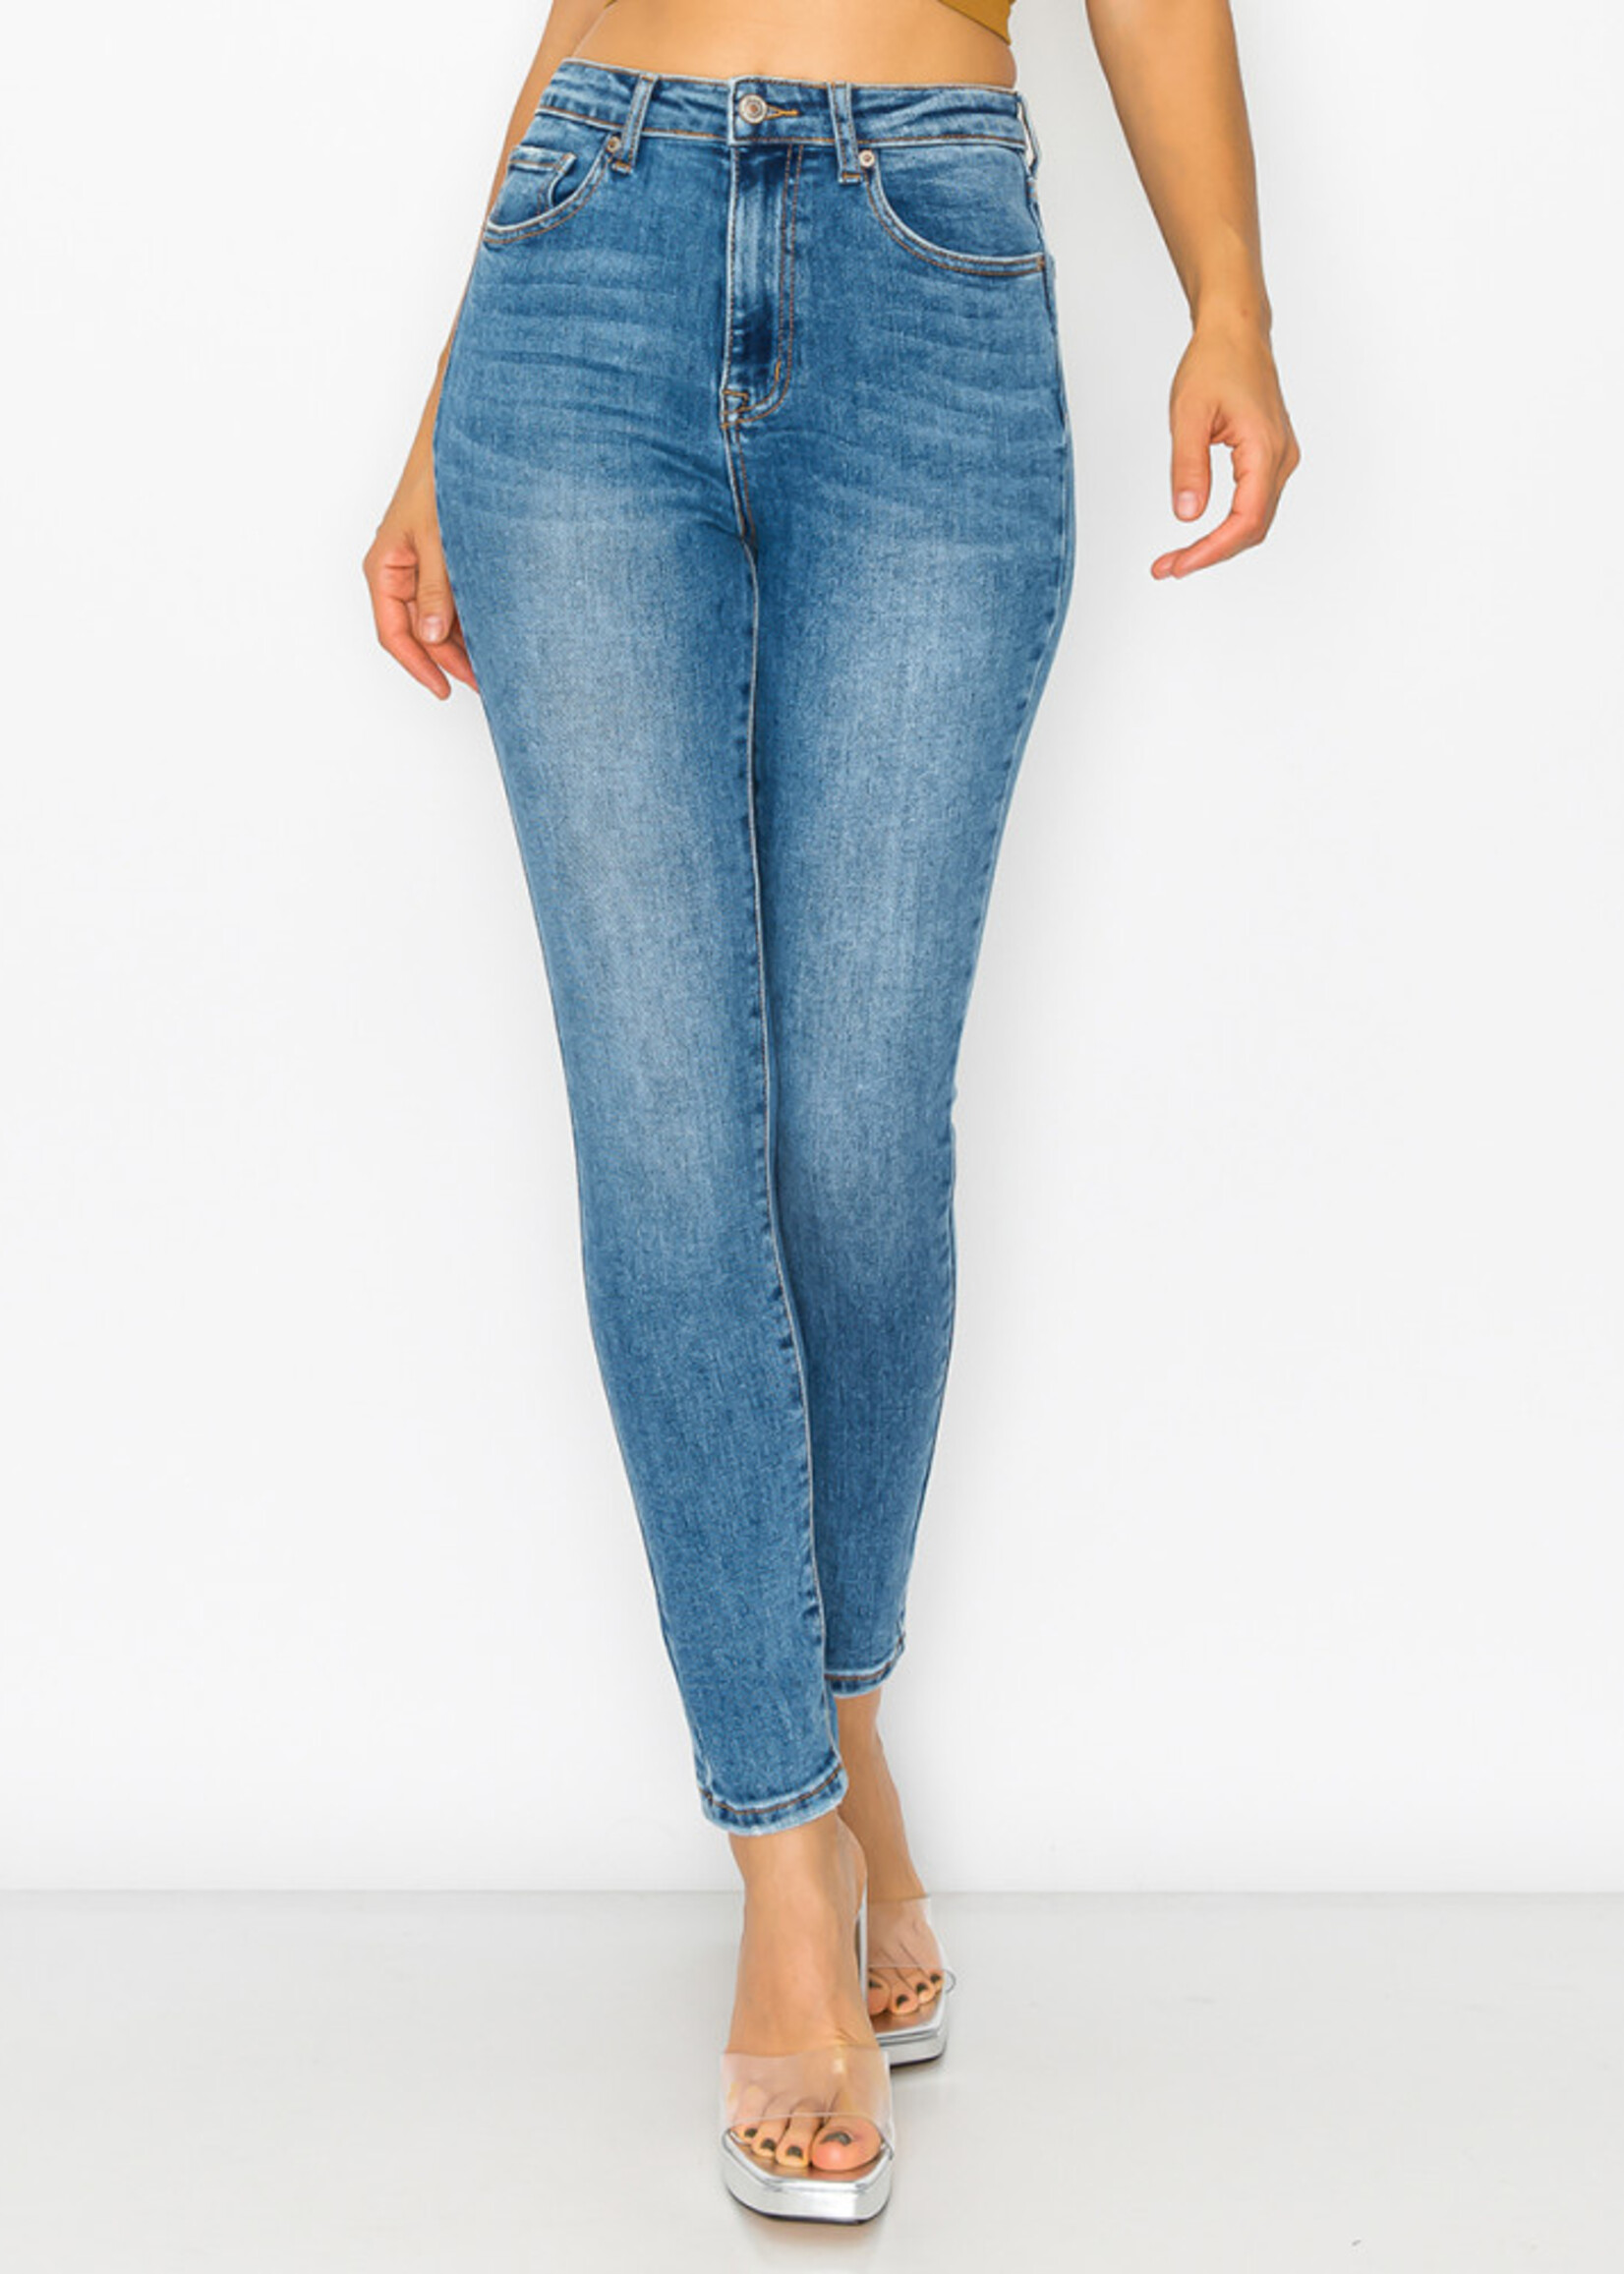 Wax Jeans - Authentic High Waisted Basic Skinny - 90284 - Oly's Home Fashion